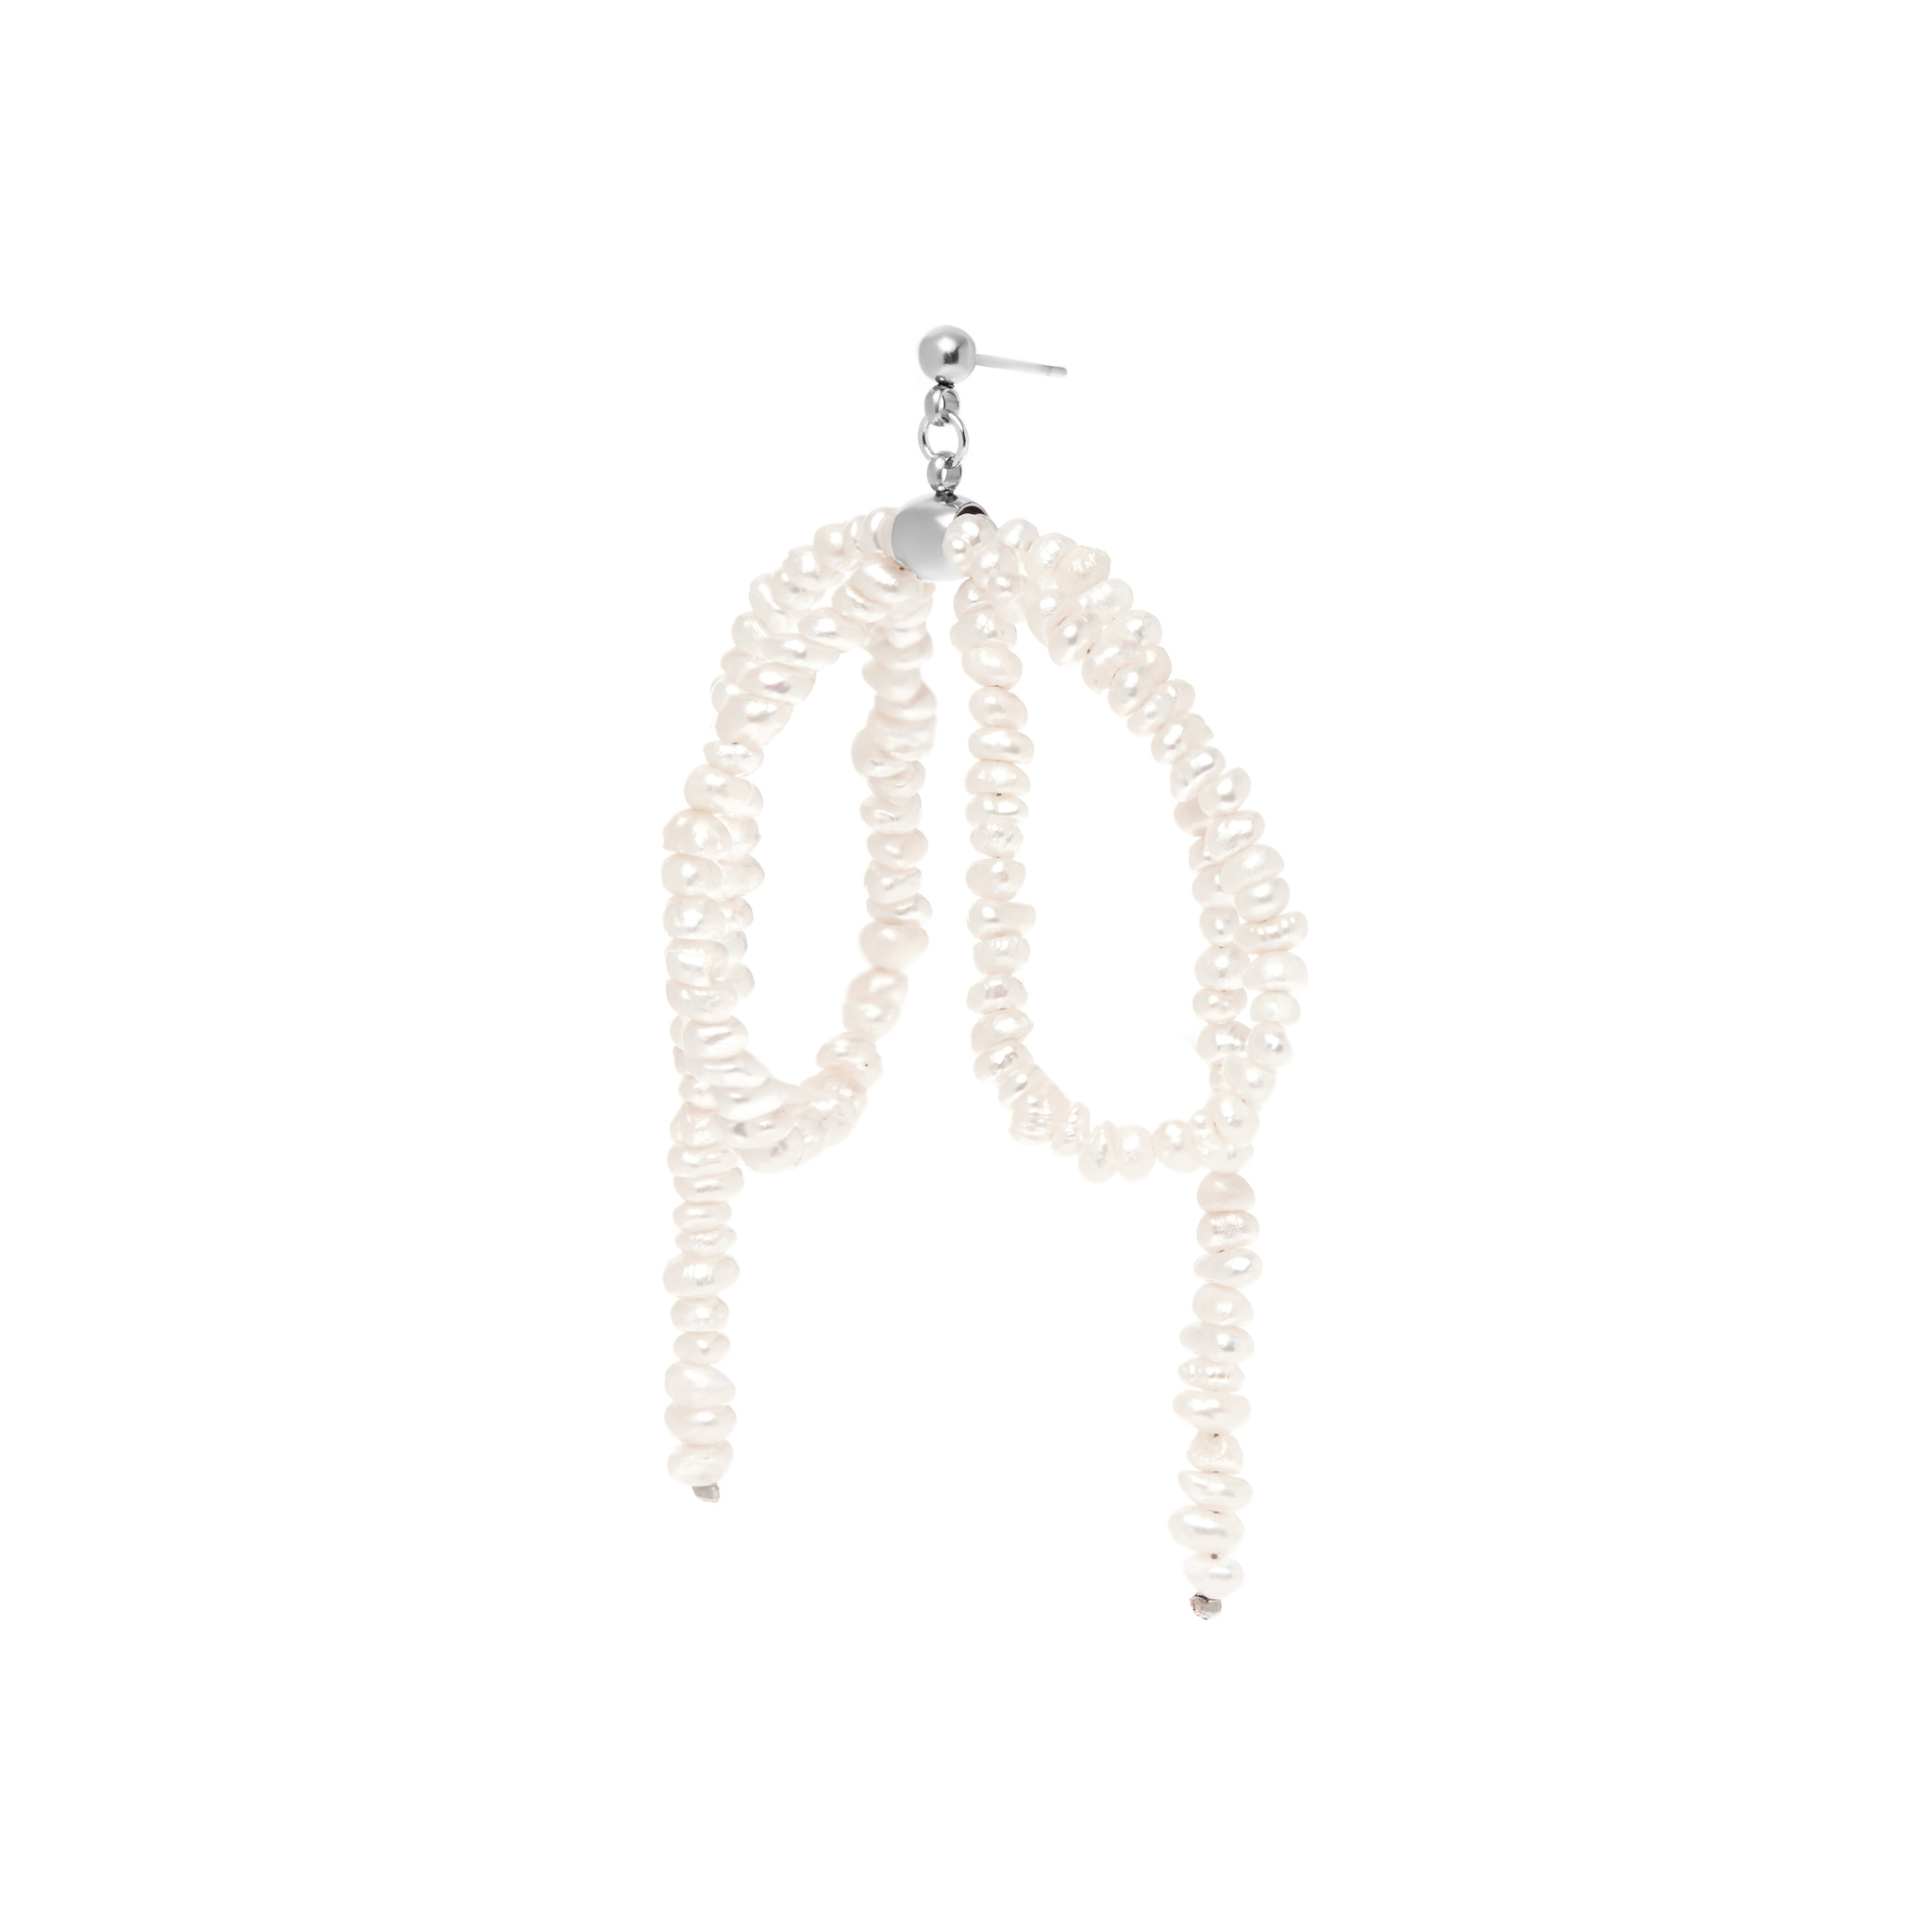 HOLLY JUNE Серьга Pearly Bow Earring holly june брошь pearly nuance brooch